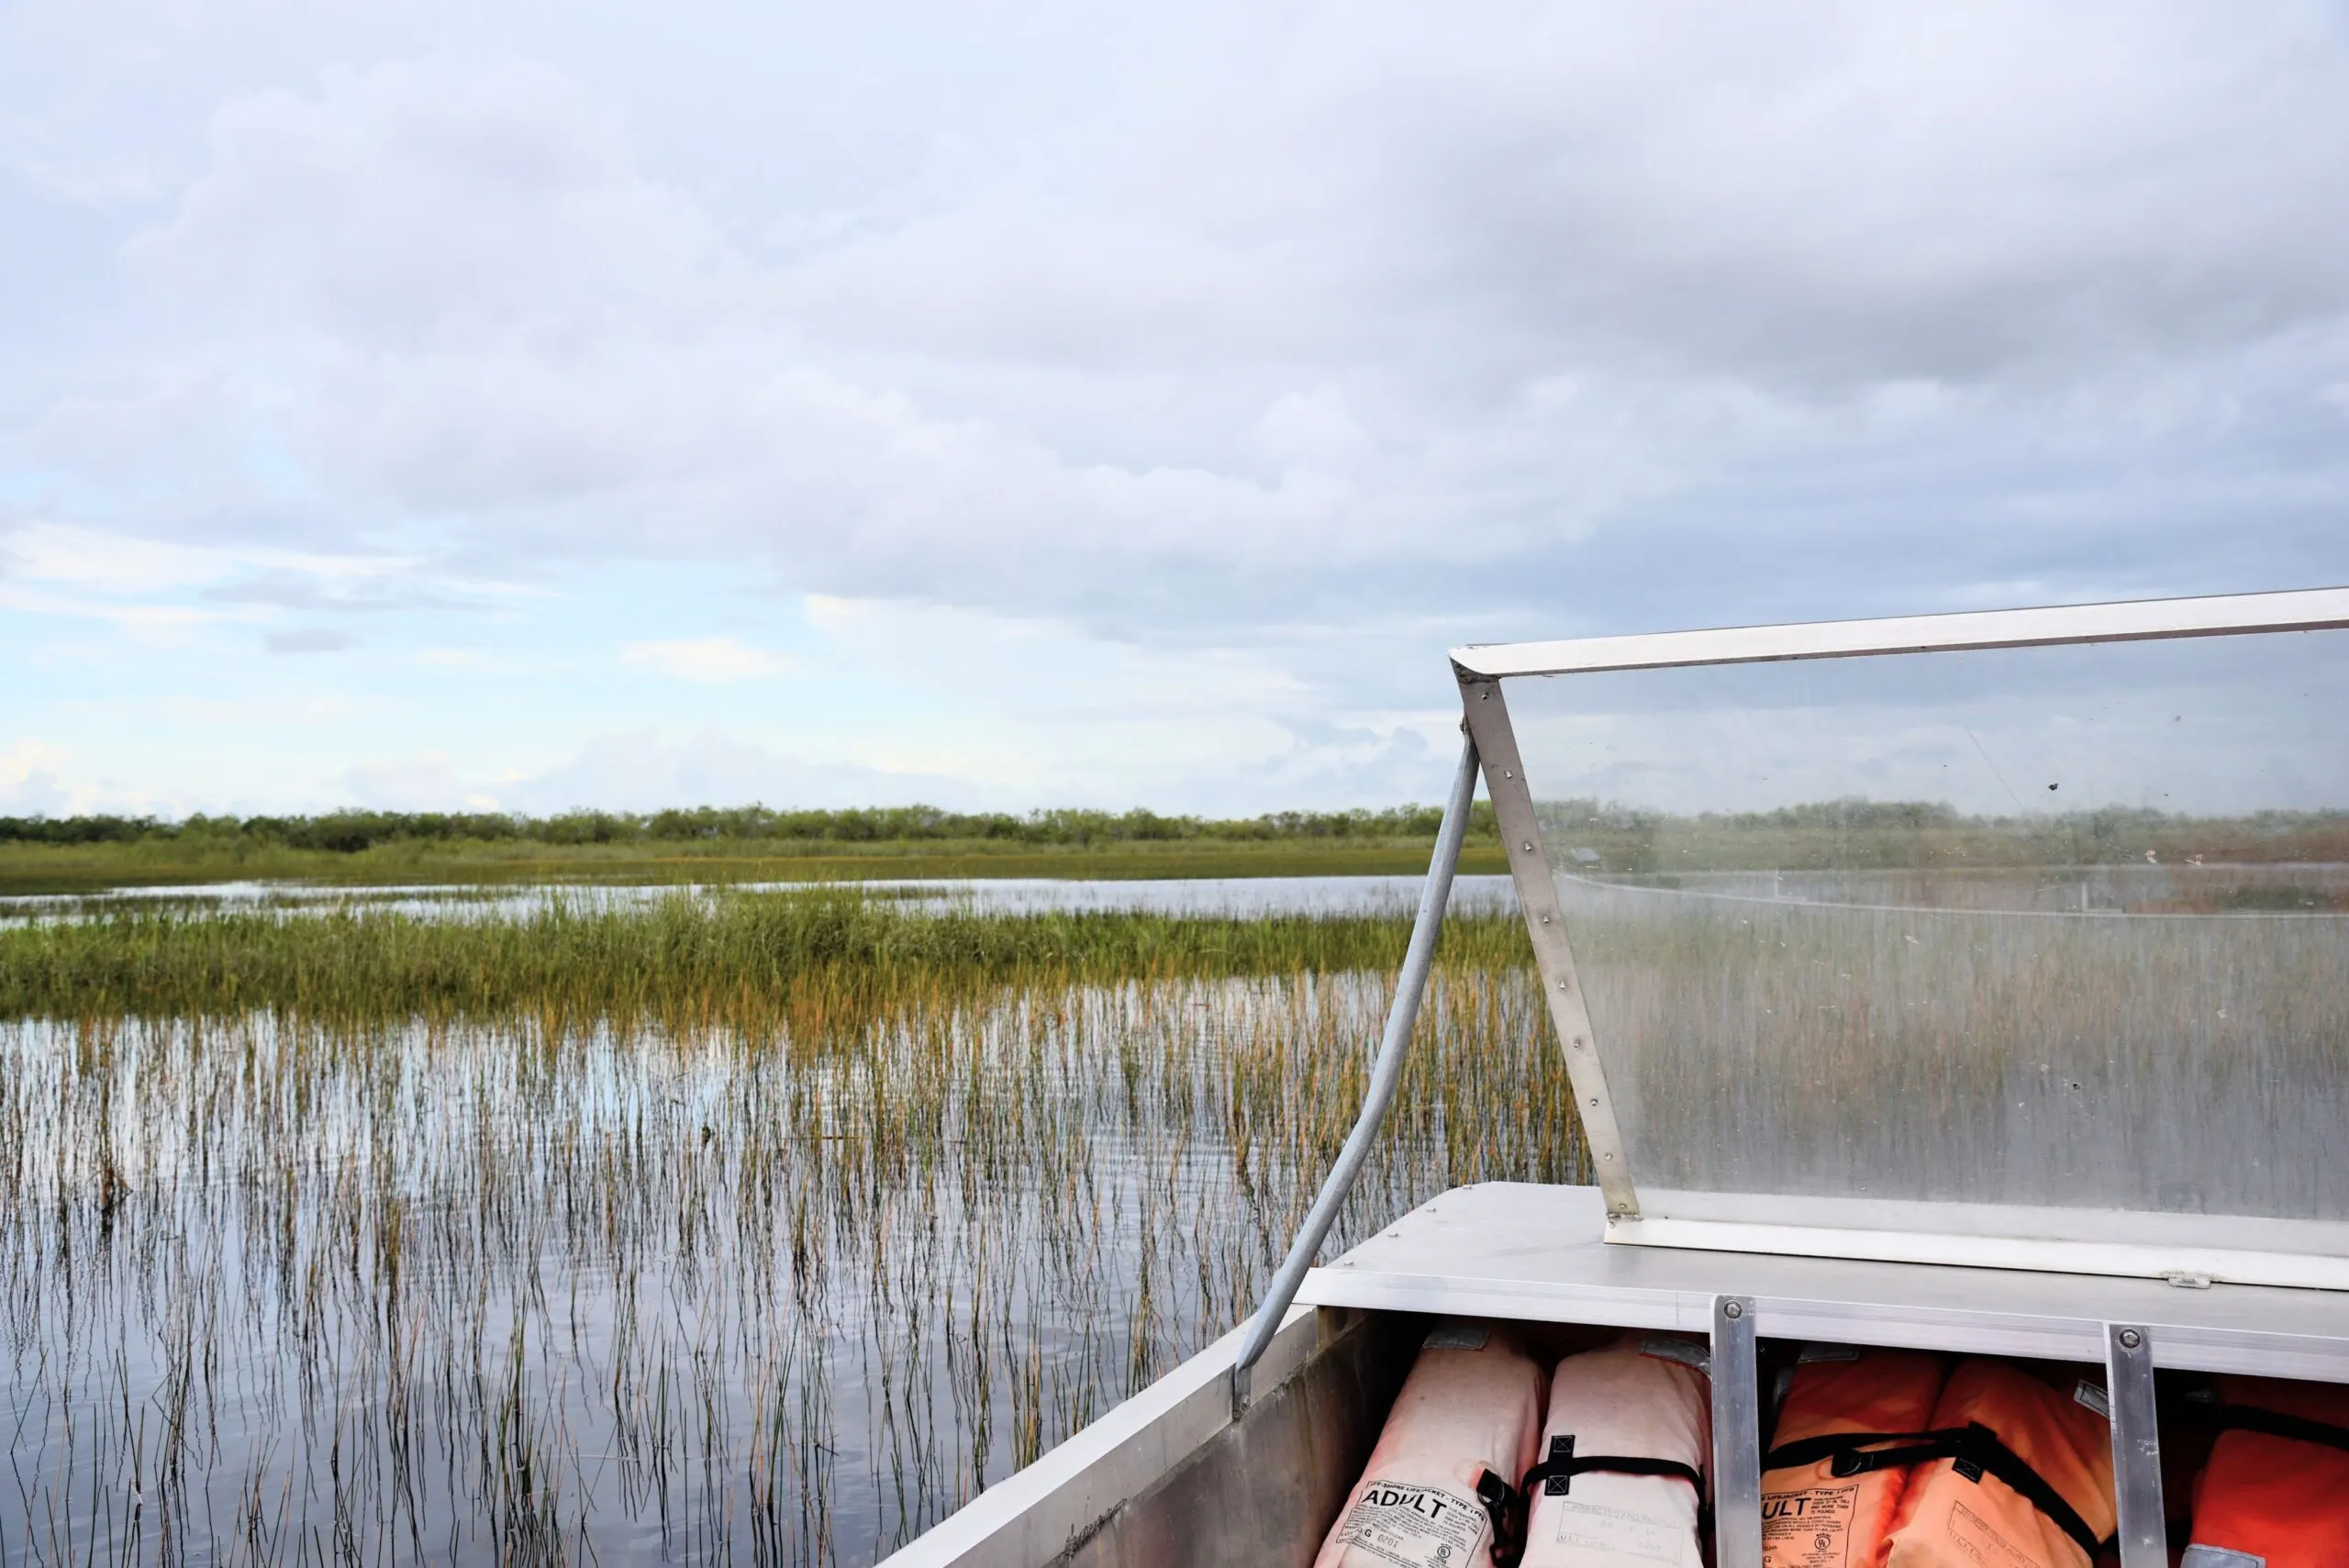 everglades is a good place to visit in Florida in February